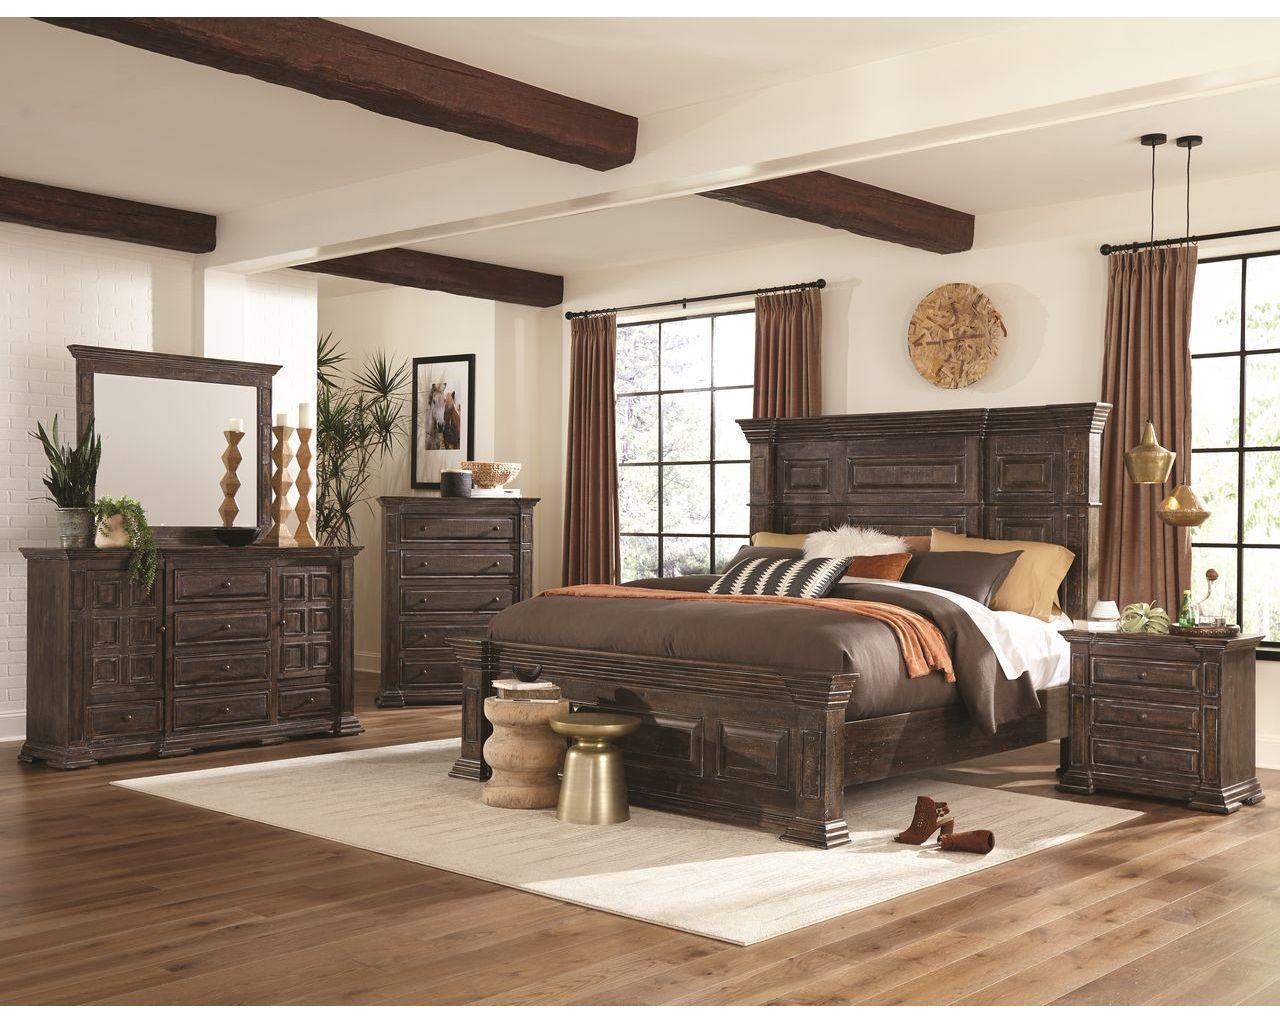 Large Brenda Bedroom Group in a rustic Brown Wood including Large PAnel Bed, Dresser mirror and nightstand